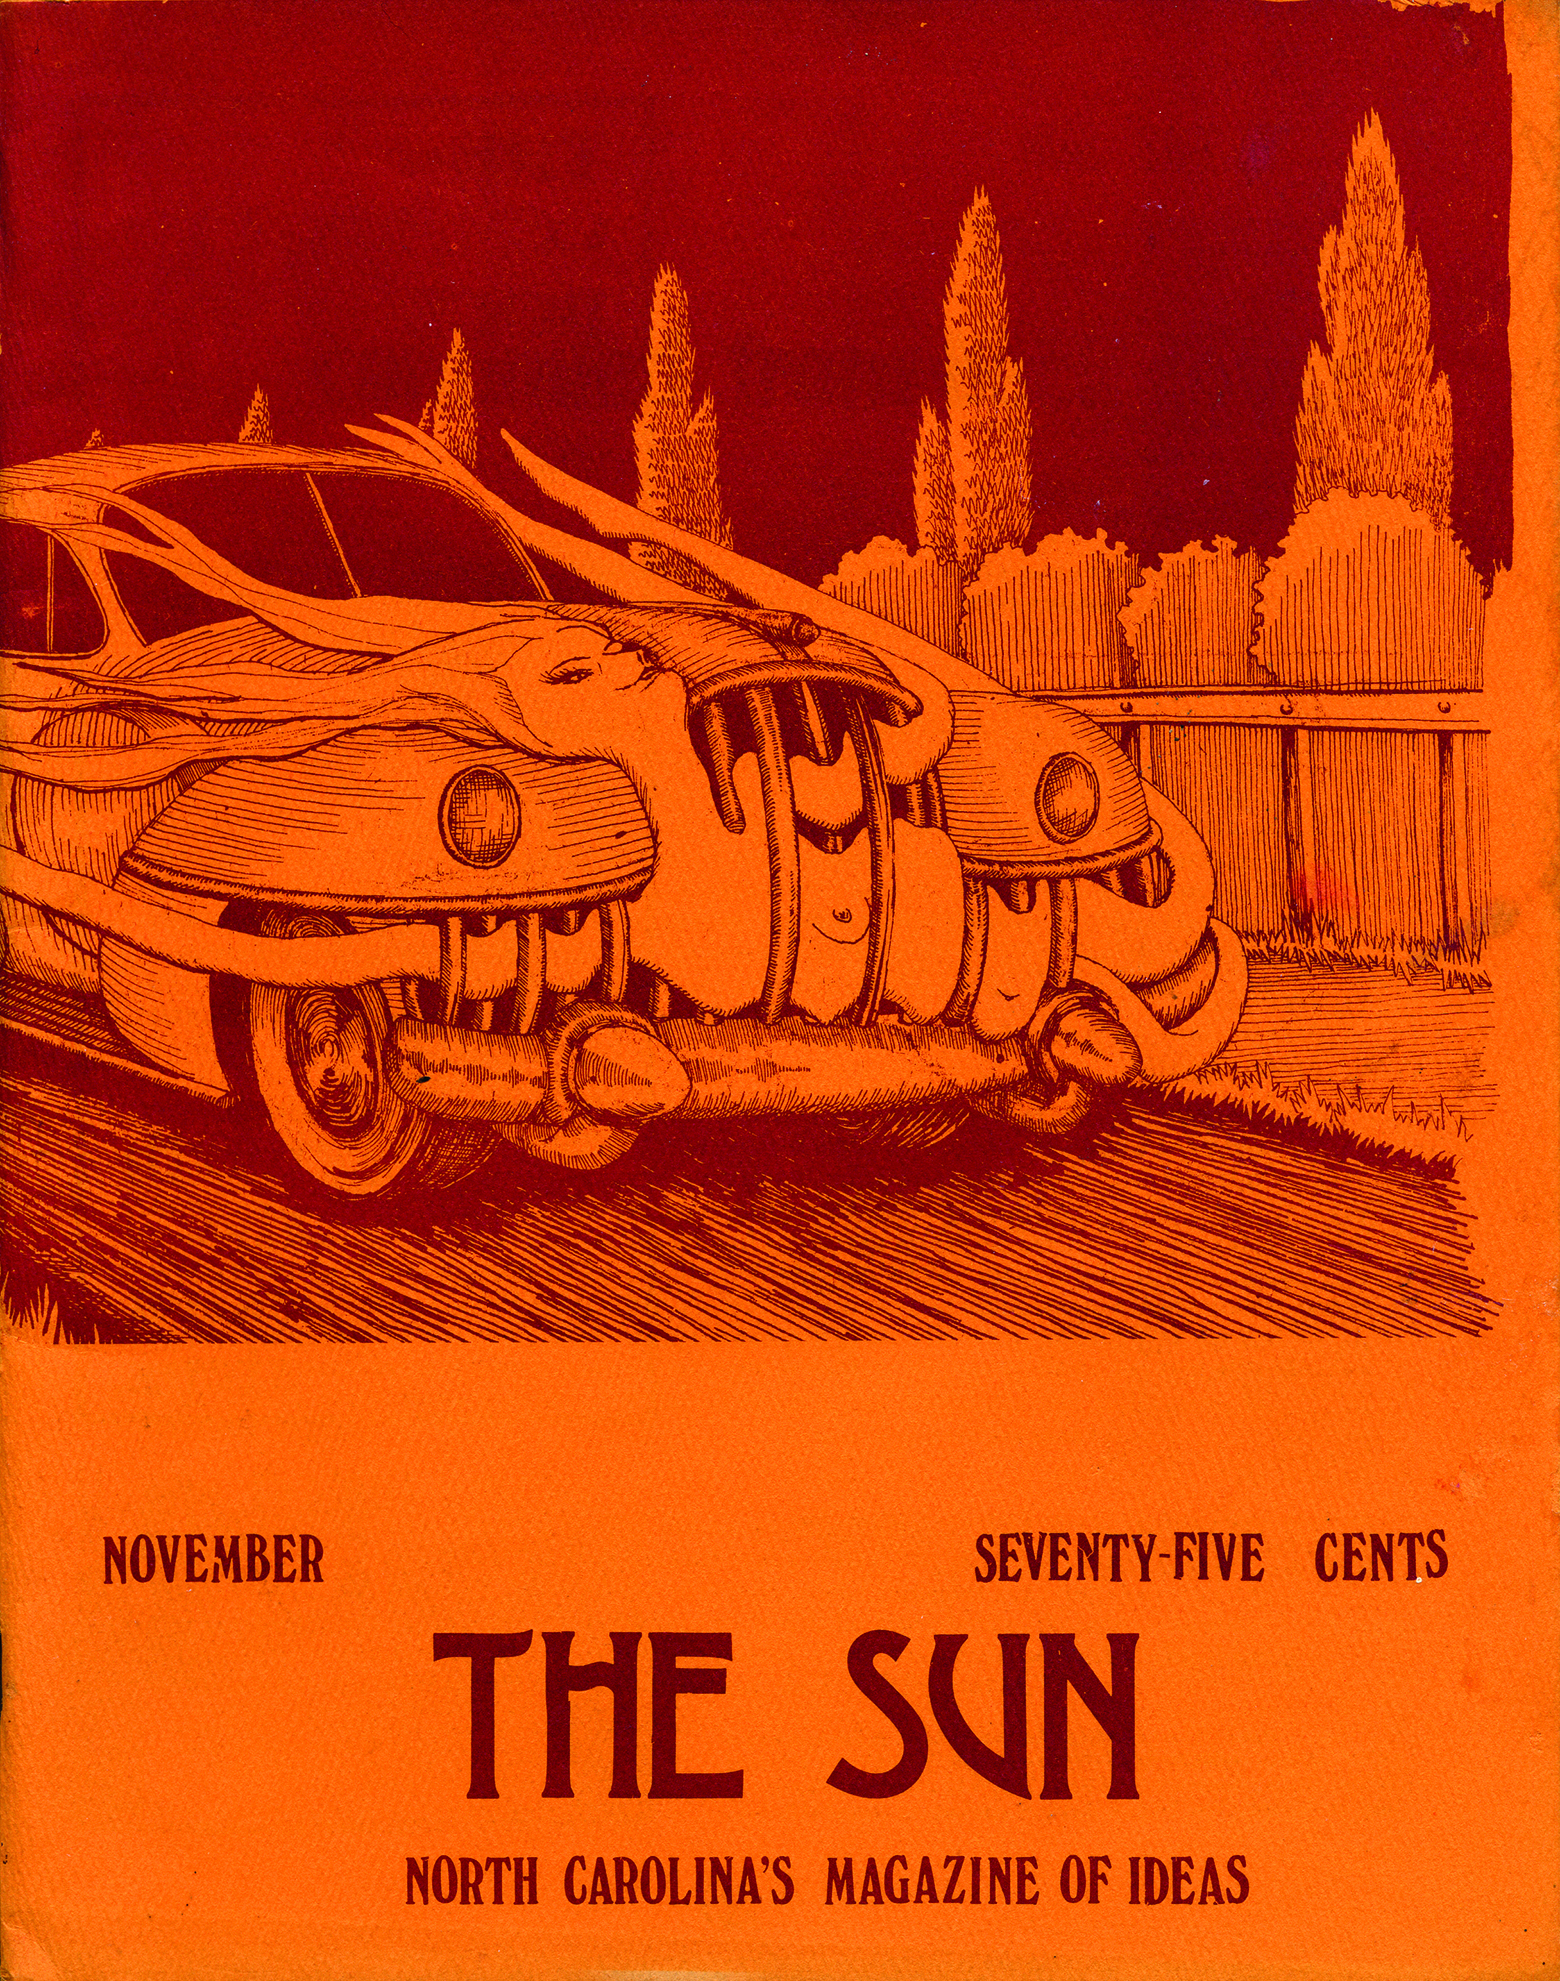 November 1975 cover of The Sun. The theme of the issue is “Women” and a garish cartoon of a car with a ghost of a woman caught in its grille is the cover image. The image is entitled “Buick Gives You Something to Believe in but Plymouth Makes It.”